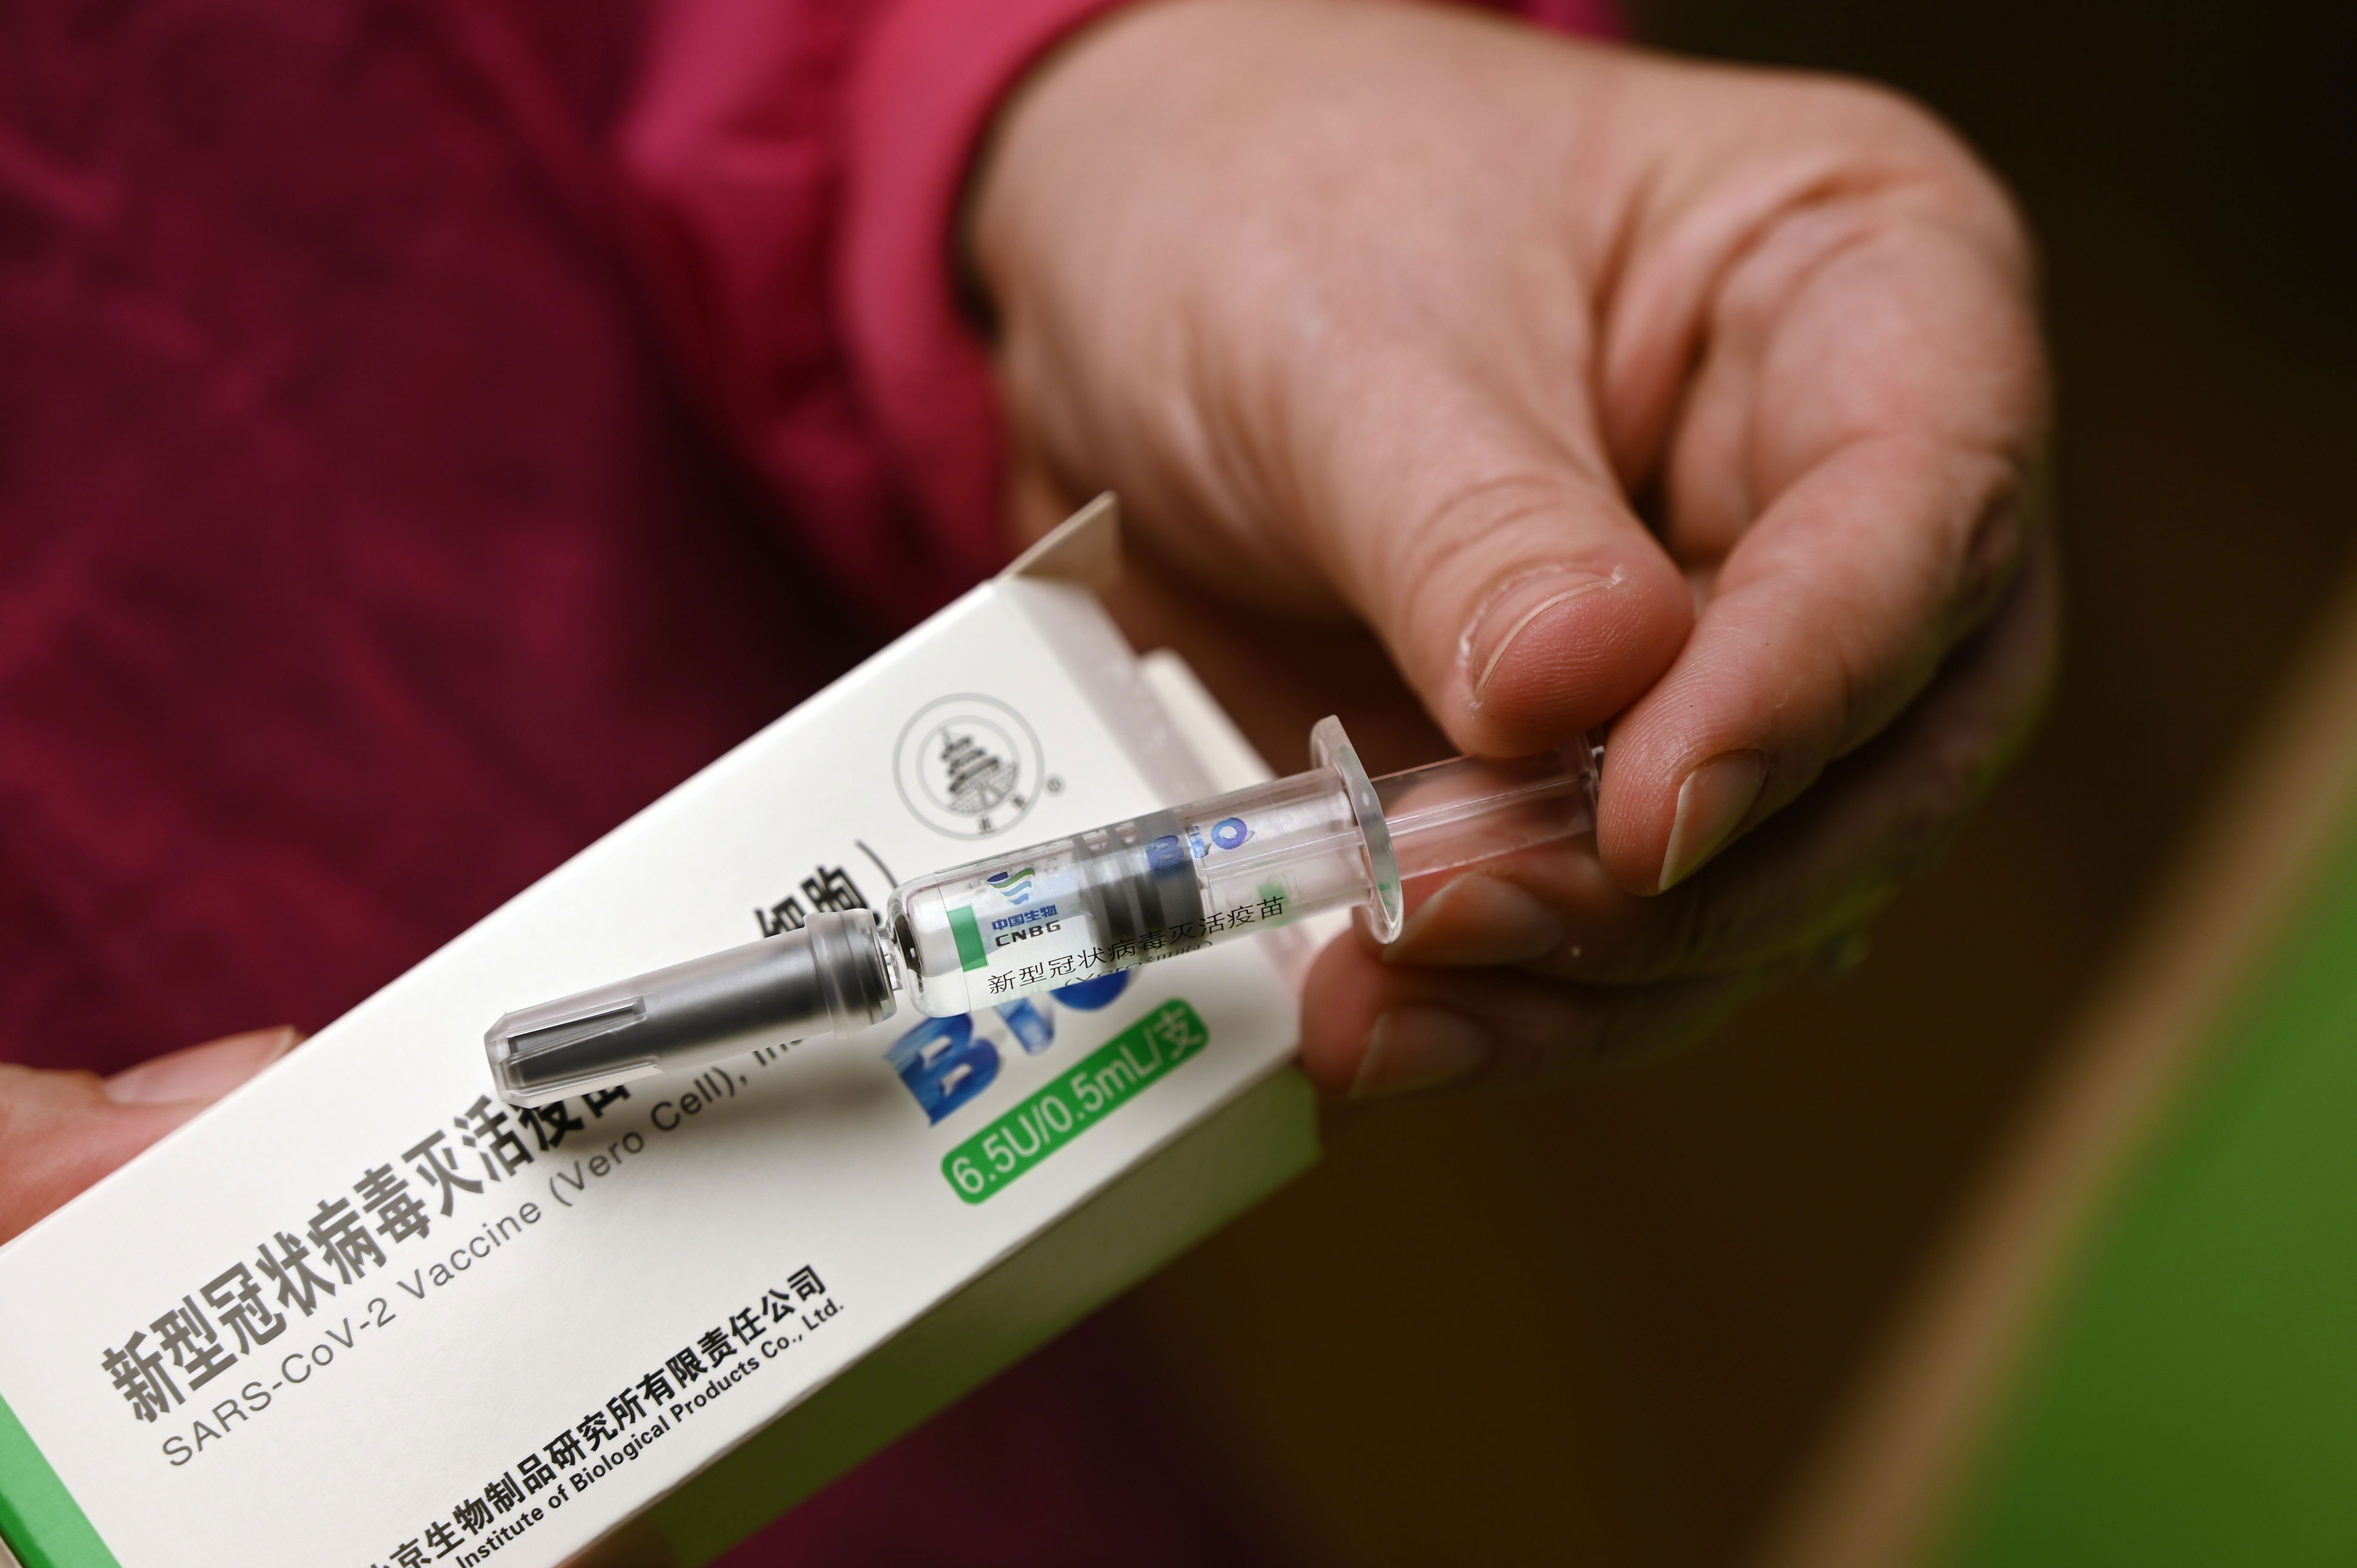 A nurse in Budapest, Hungary, holds a dose of the Covid-19 vaccine developed by China's Sinopharm on February 25.